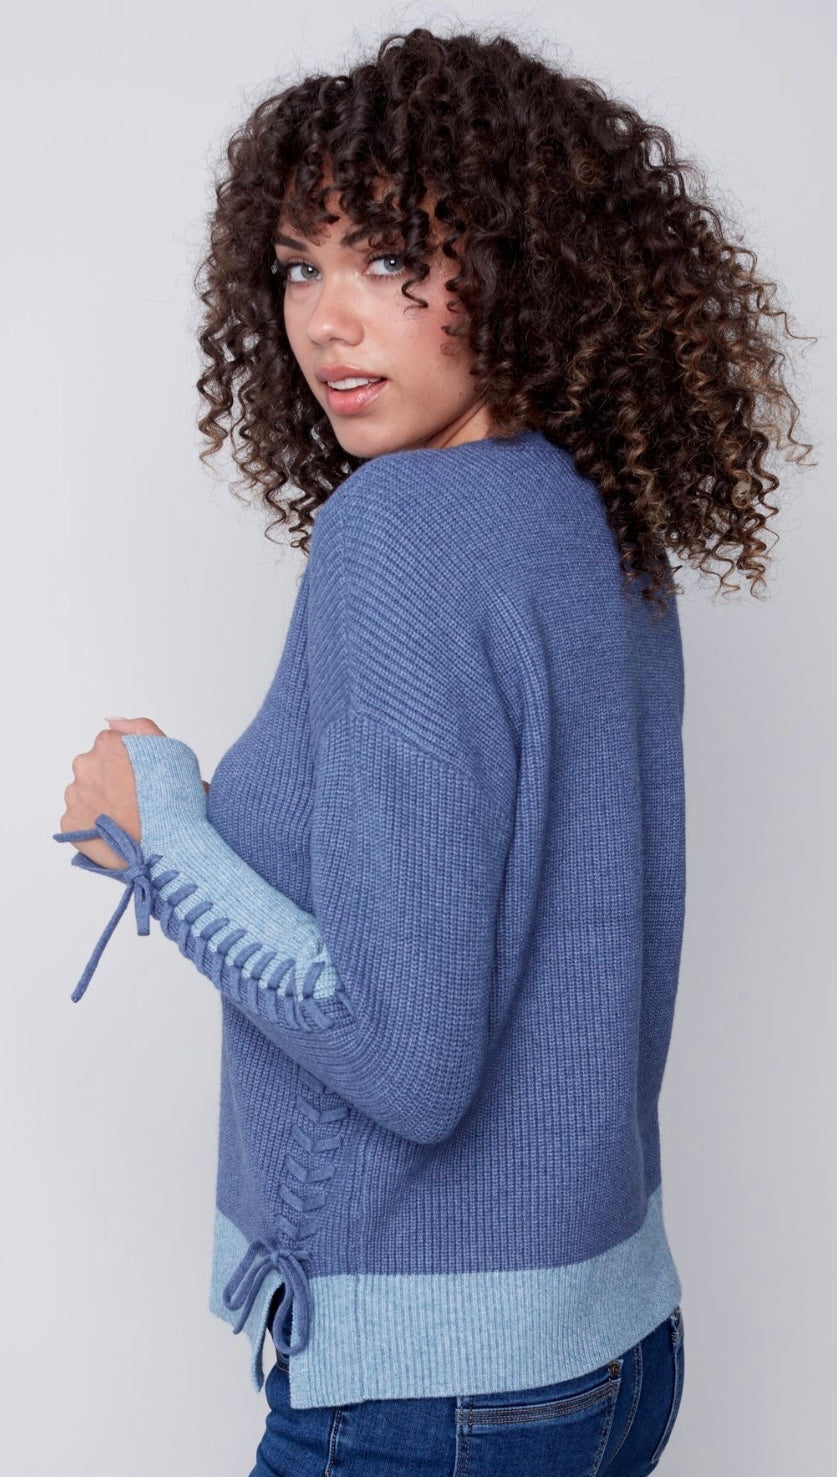 Colorblock sweater with laceup detail (2 colors) up to XXL